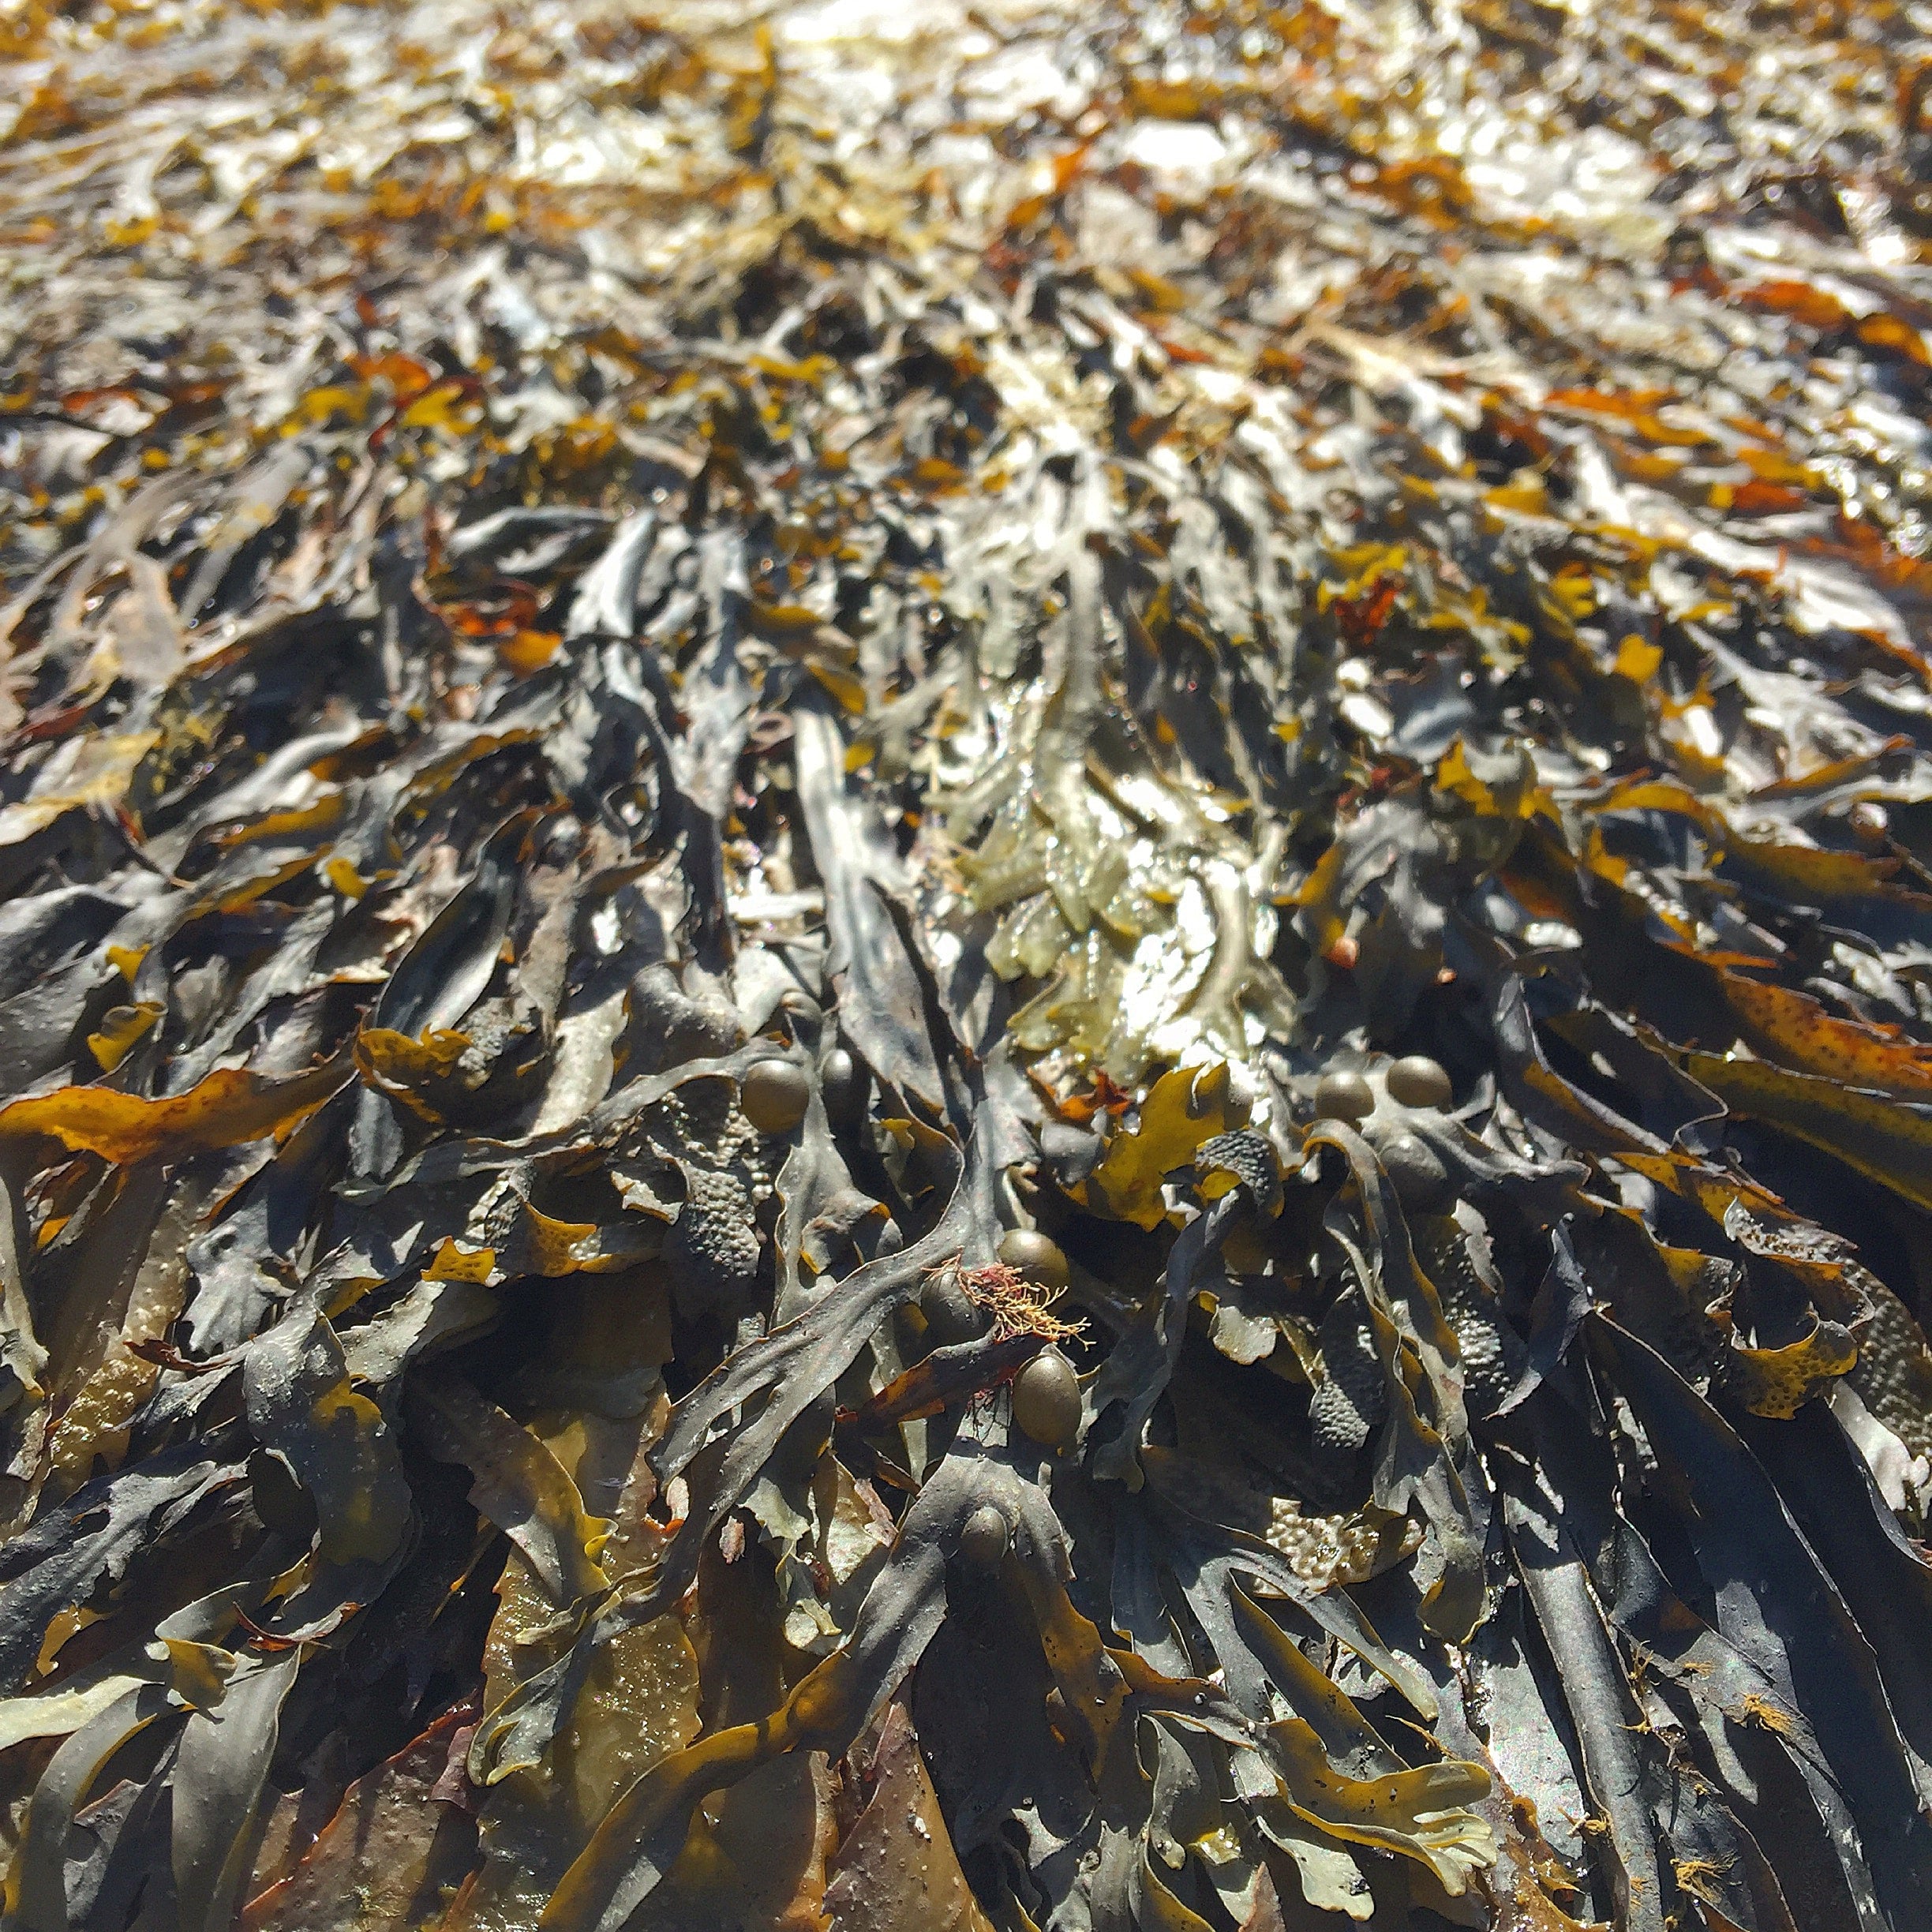 a picture of a pile of sea kelp on the ocean